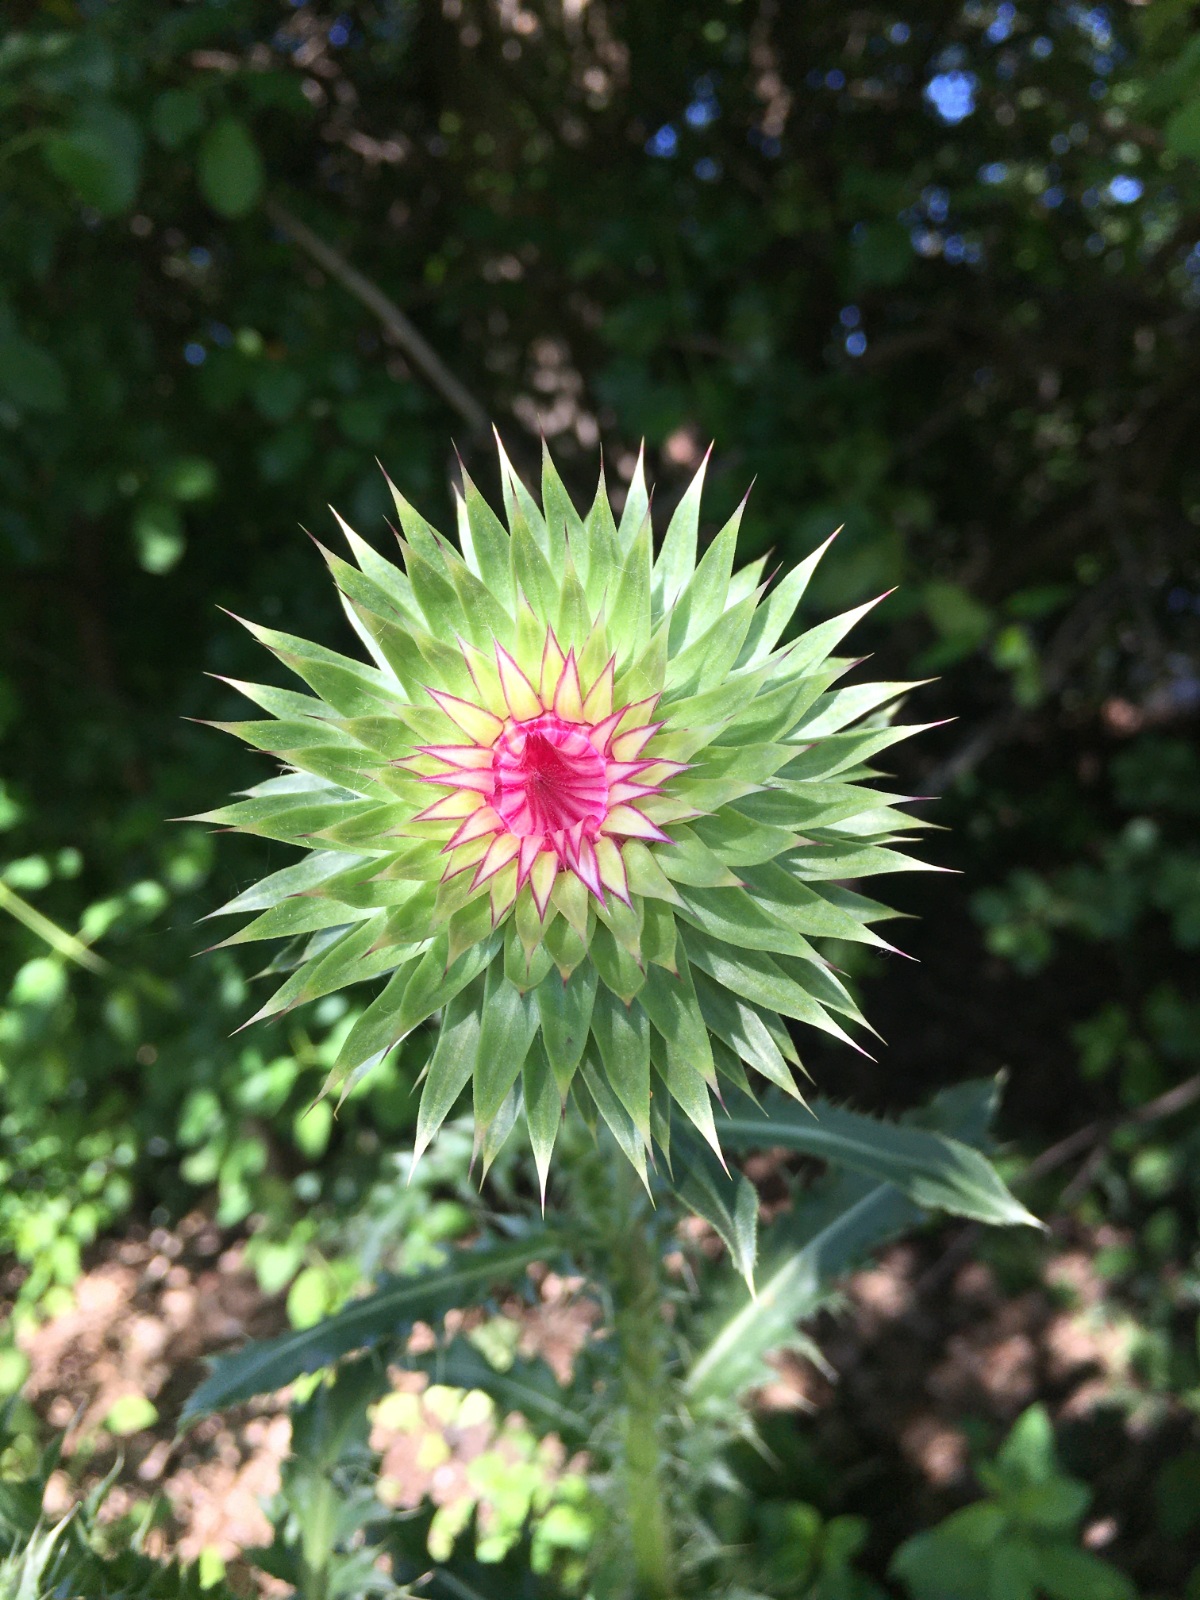 A Beautiful Musk Thistle Weed Along the Path.